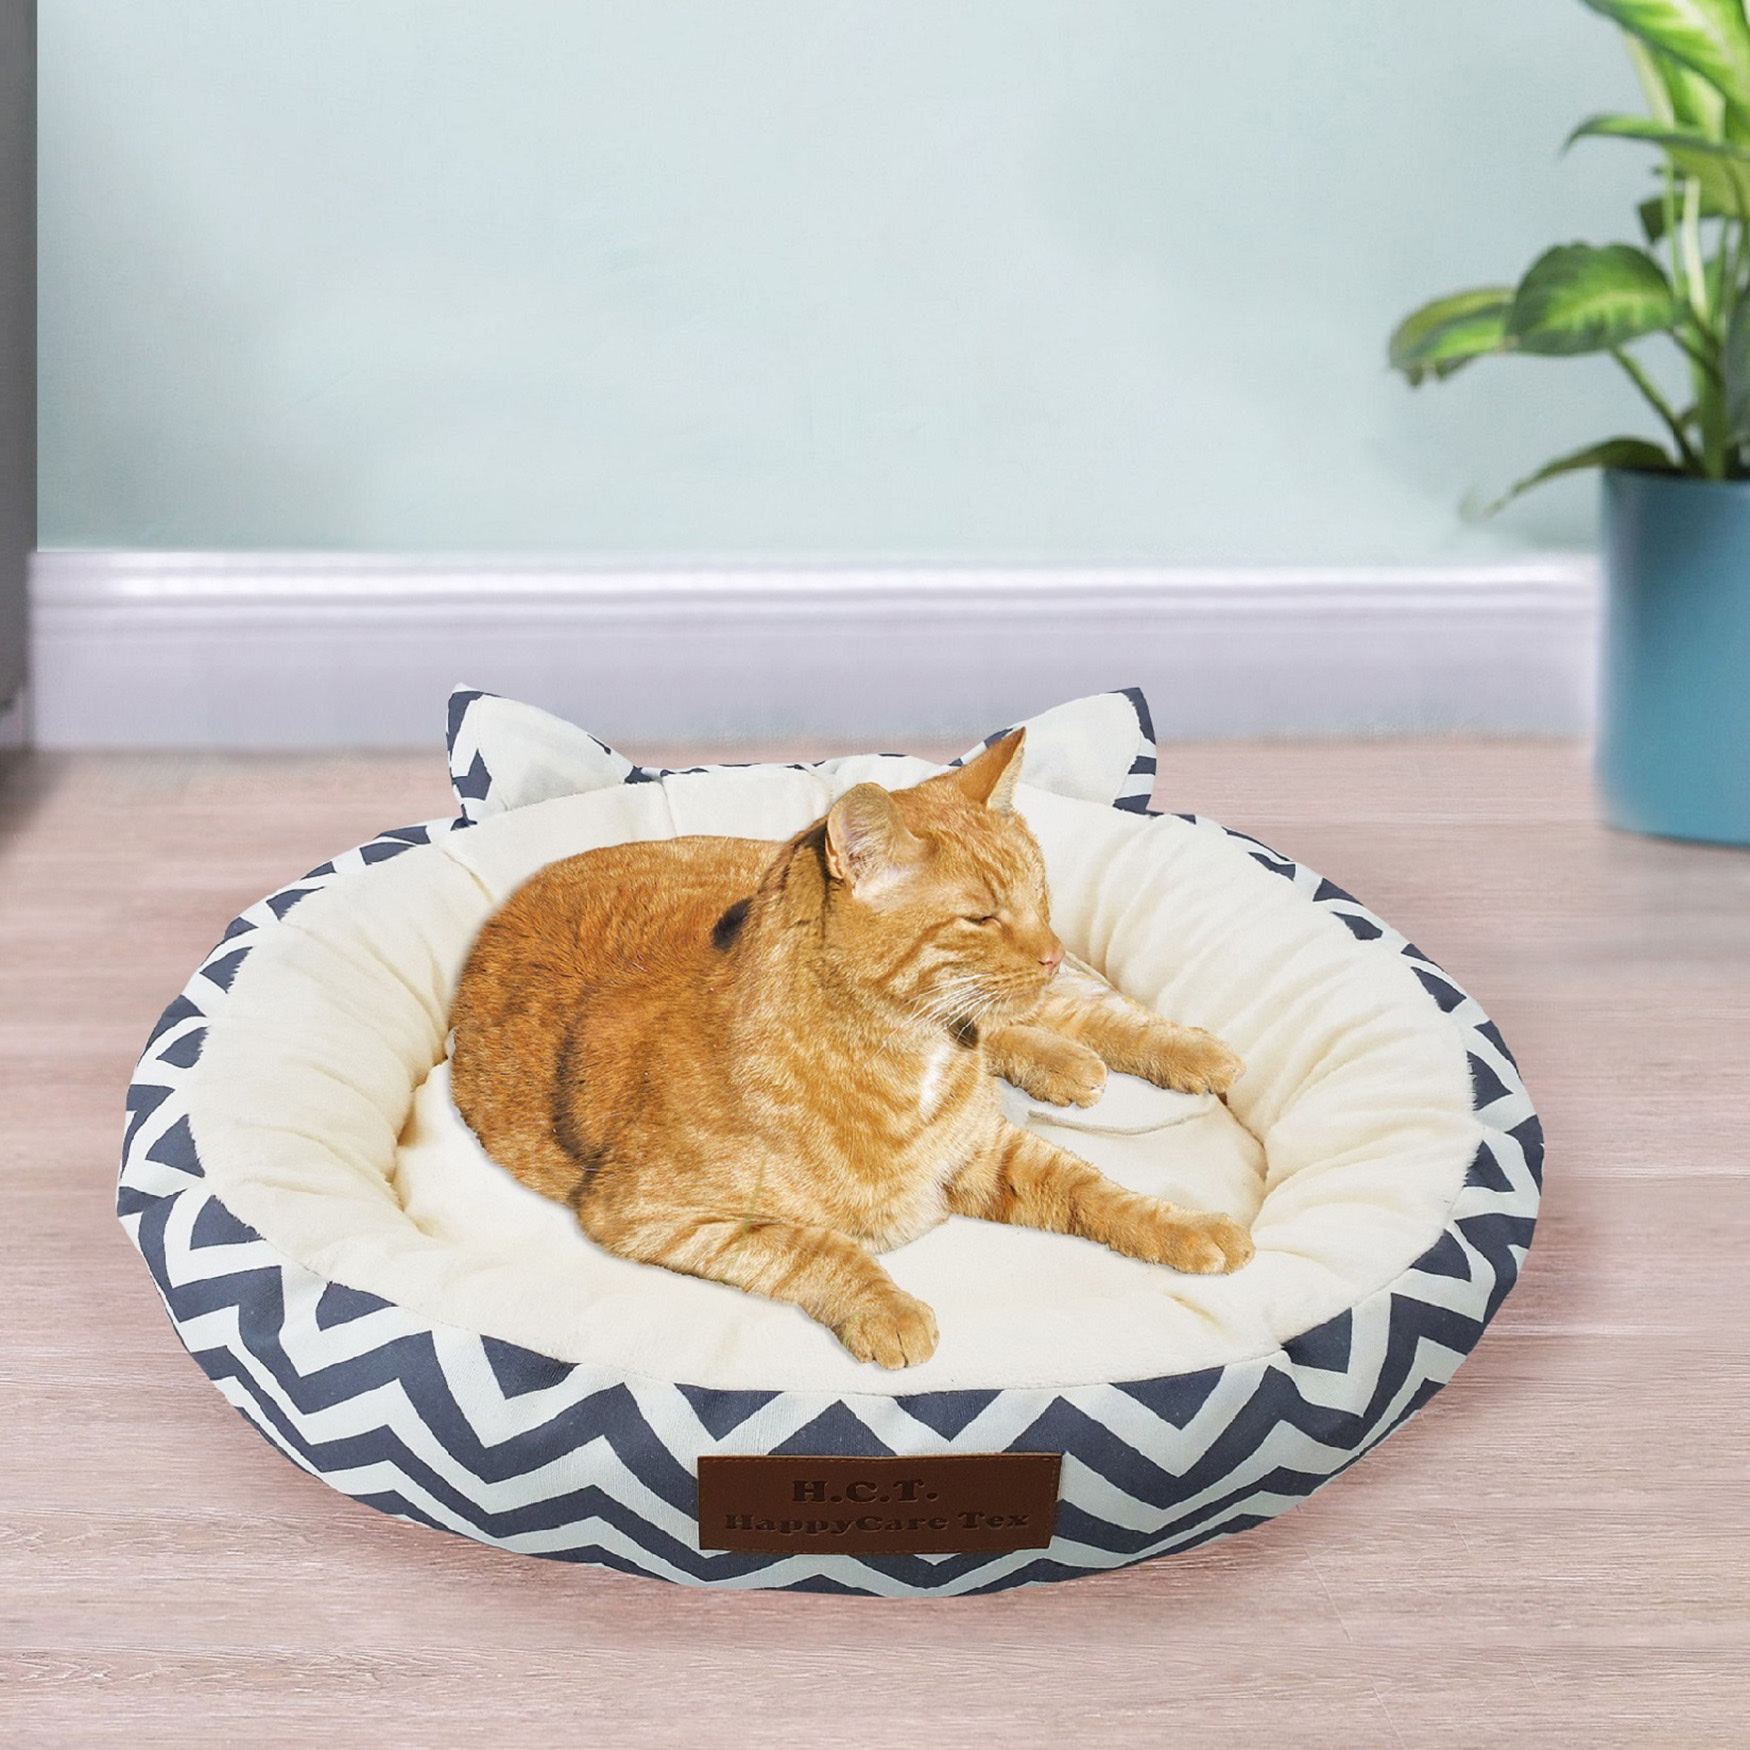 Chevron Printing poly-cotton cozy round cat bed , 21 inch, GREY